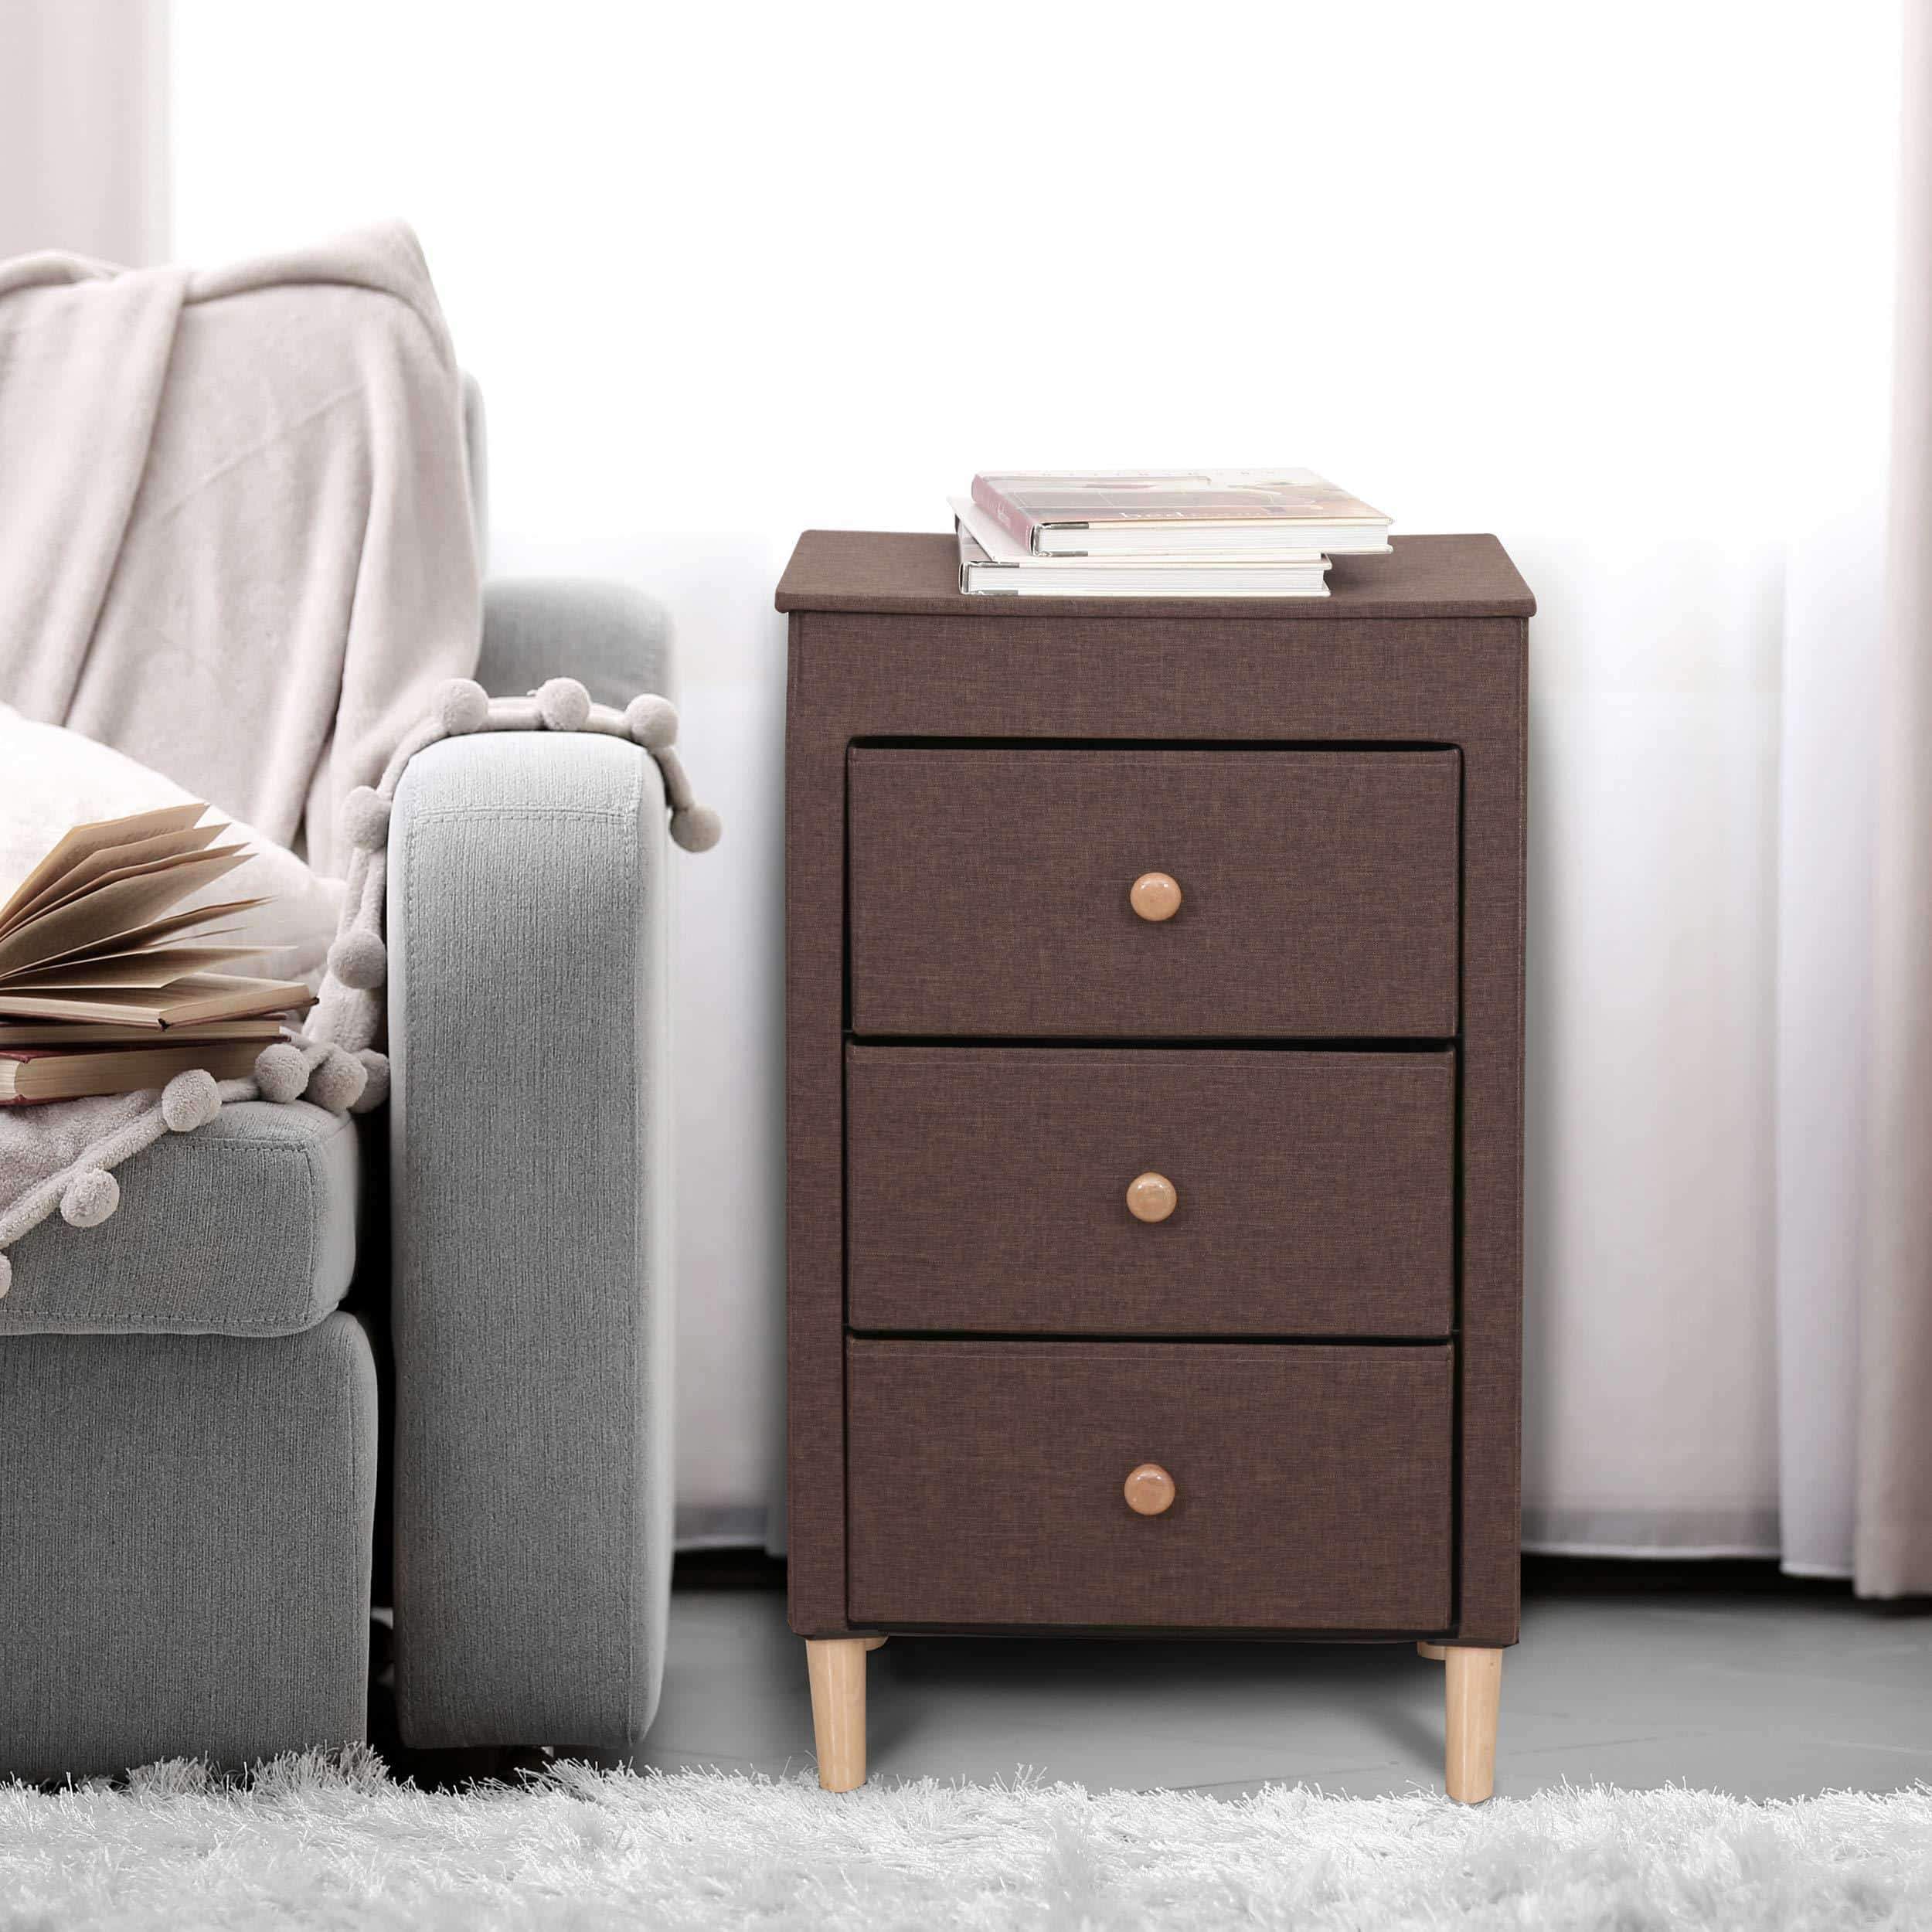 Best itidy 3 drawer dresser premium linen fabric nightstand bedside table end table storage drawer chest for nursery closet bedroom and bathroom storage drawer unit no tool requried to assemble brown